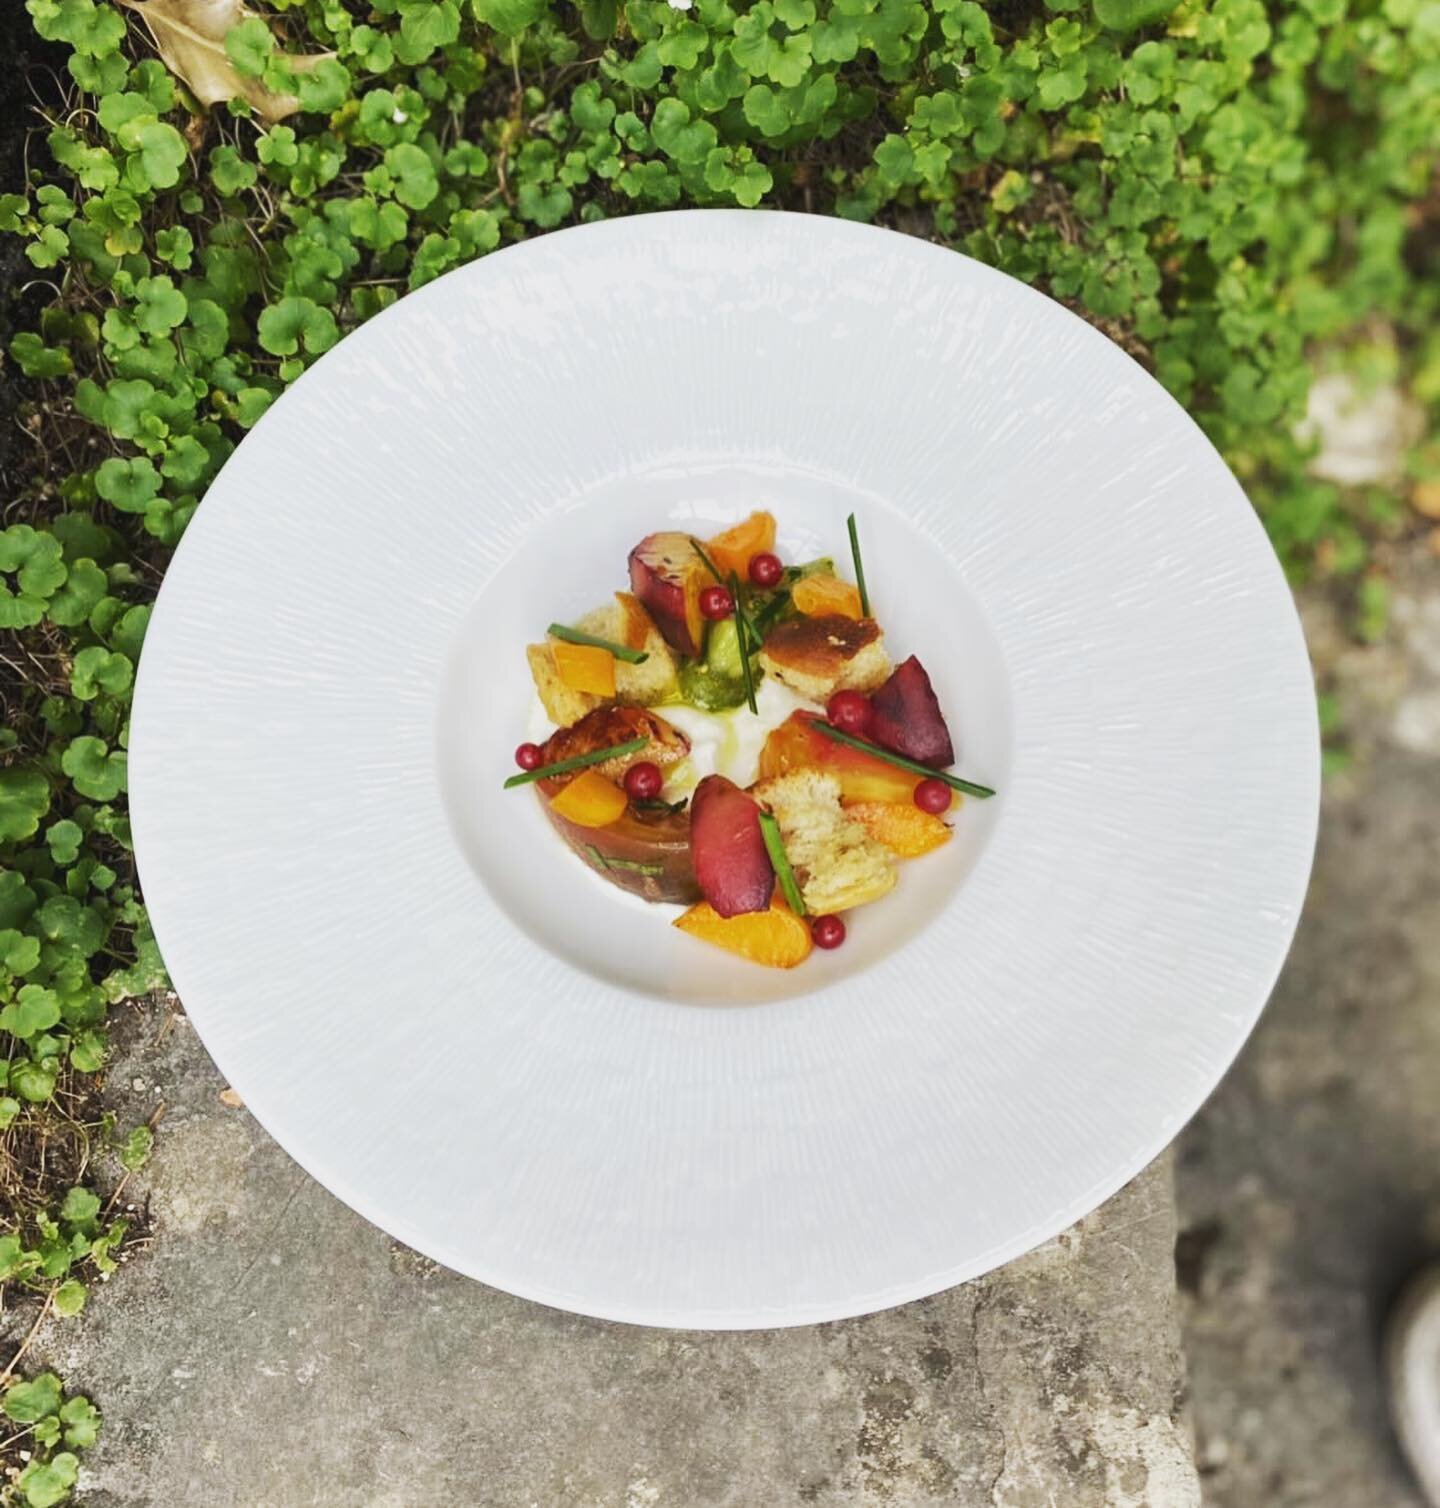 Early summer produce has filled the markets of France with abundance and color. In 10 days, Jay Rodriguez will begin his second residency @closerielescapucines in Arbois where he will cook with the season, the region, and present his inspired twists 